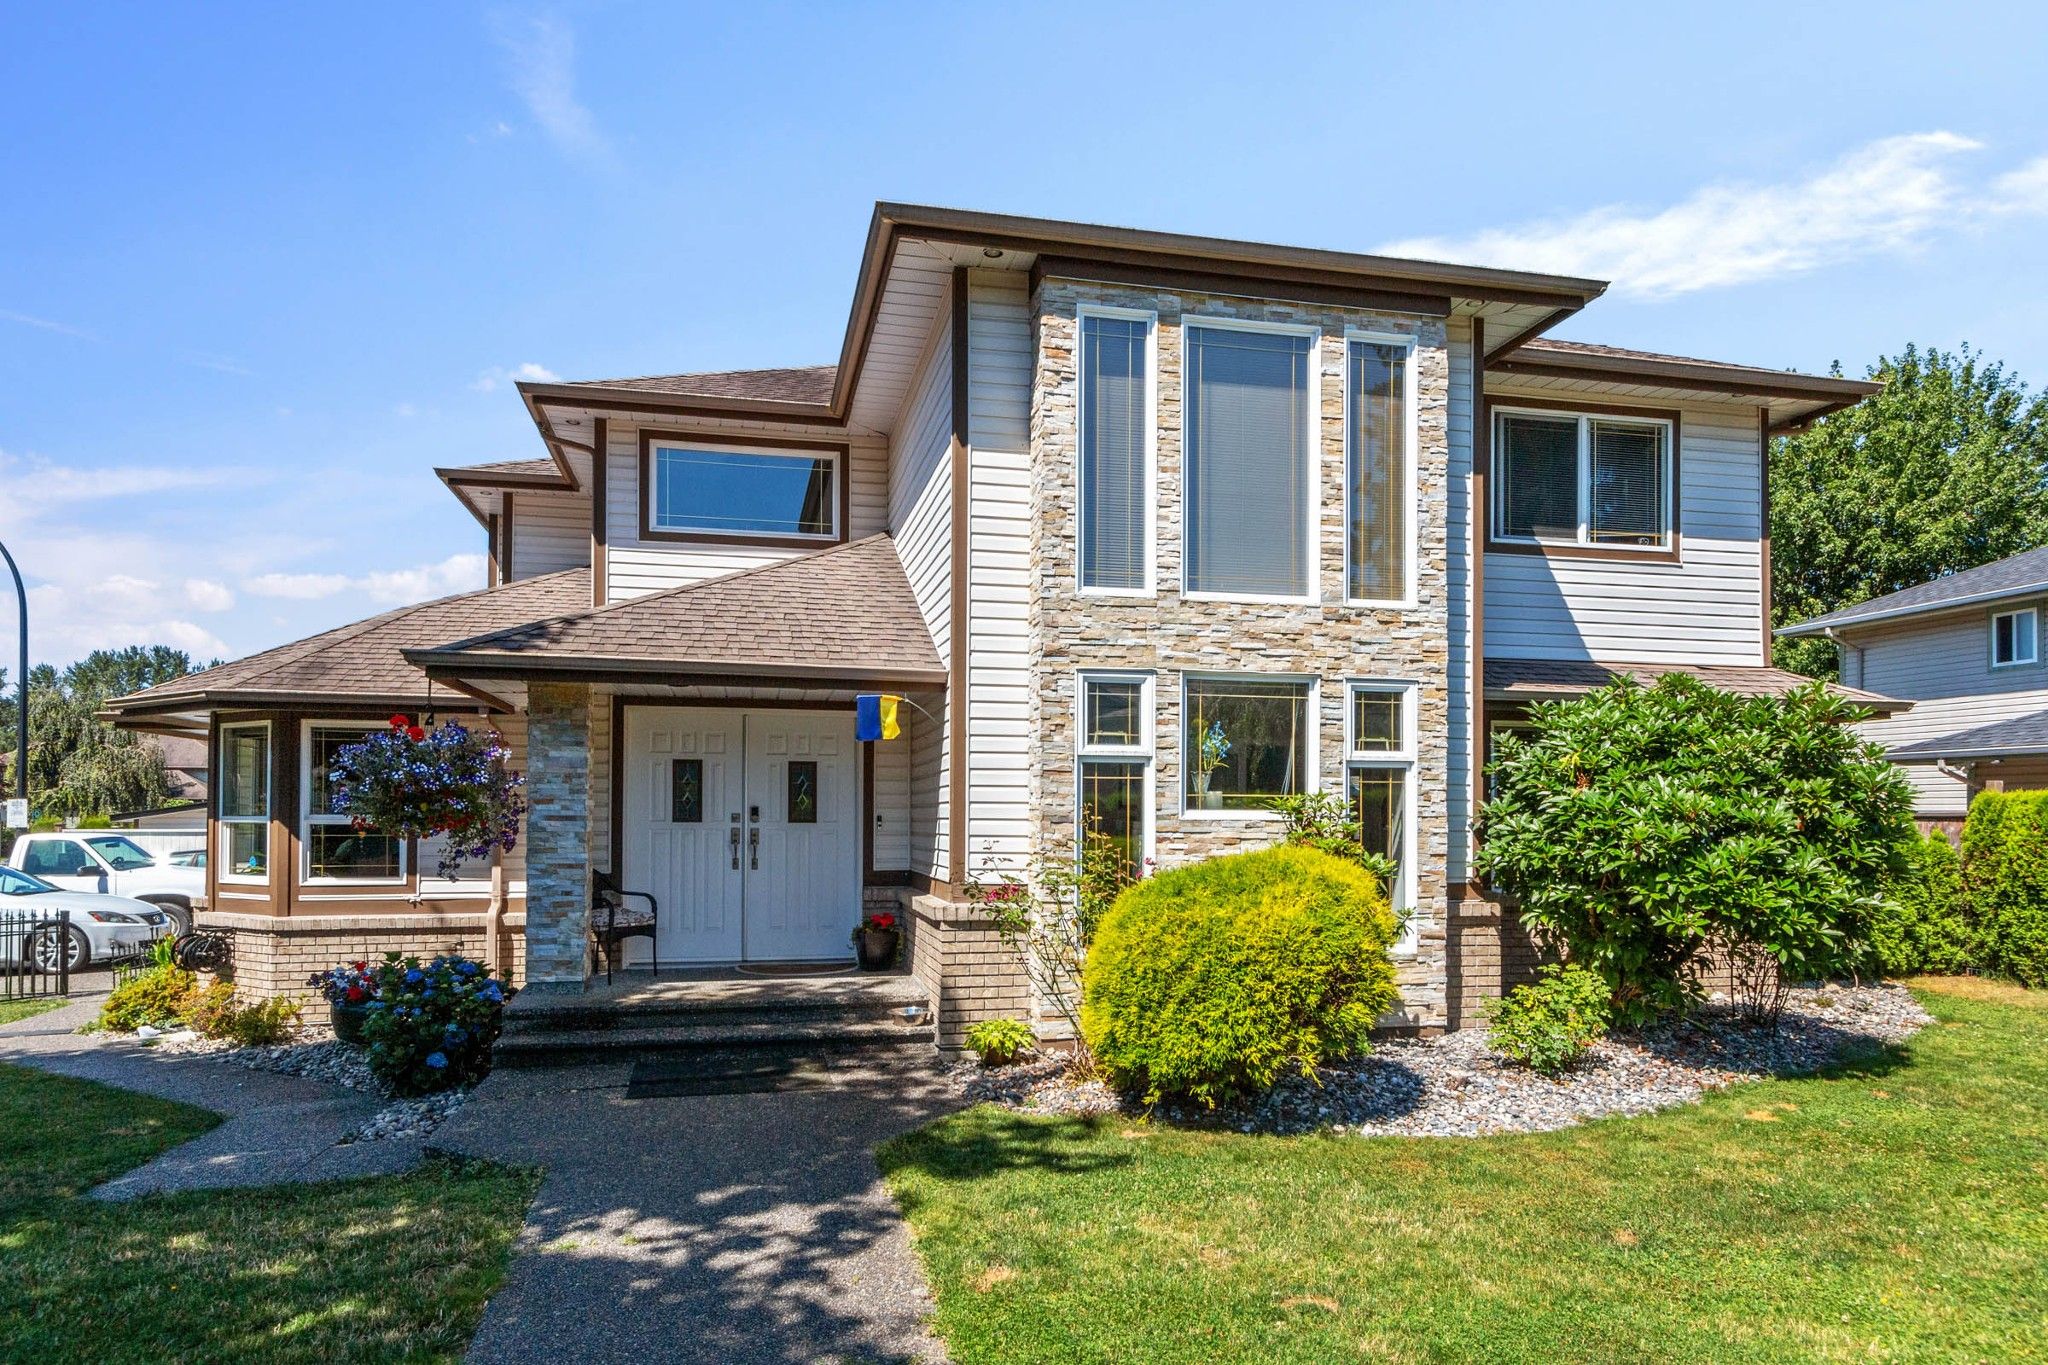 I have sold a property at 22797 127 AVE in Maple Ridge
